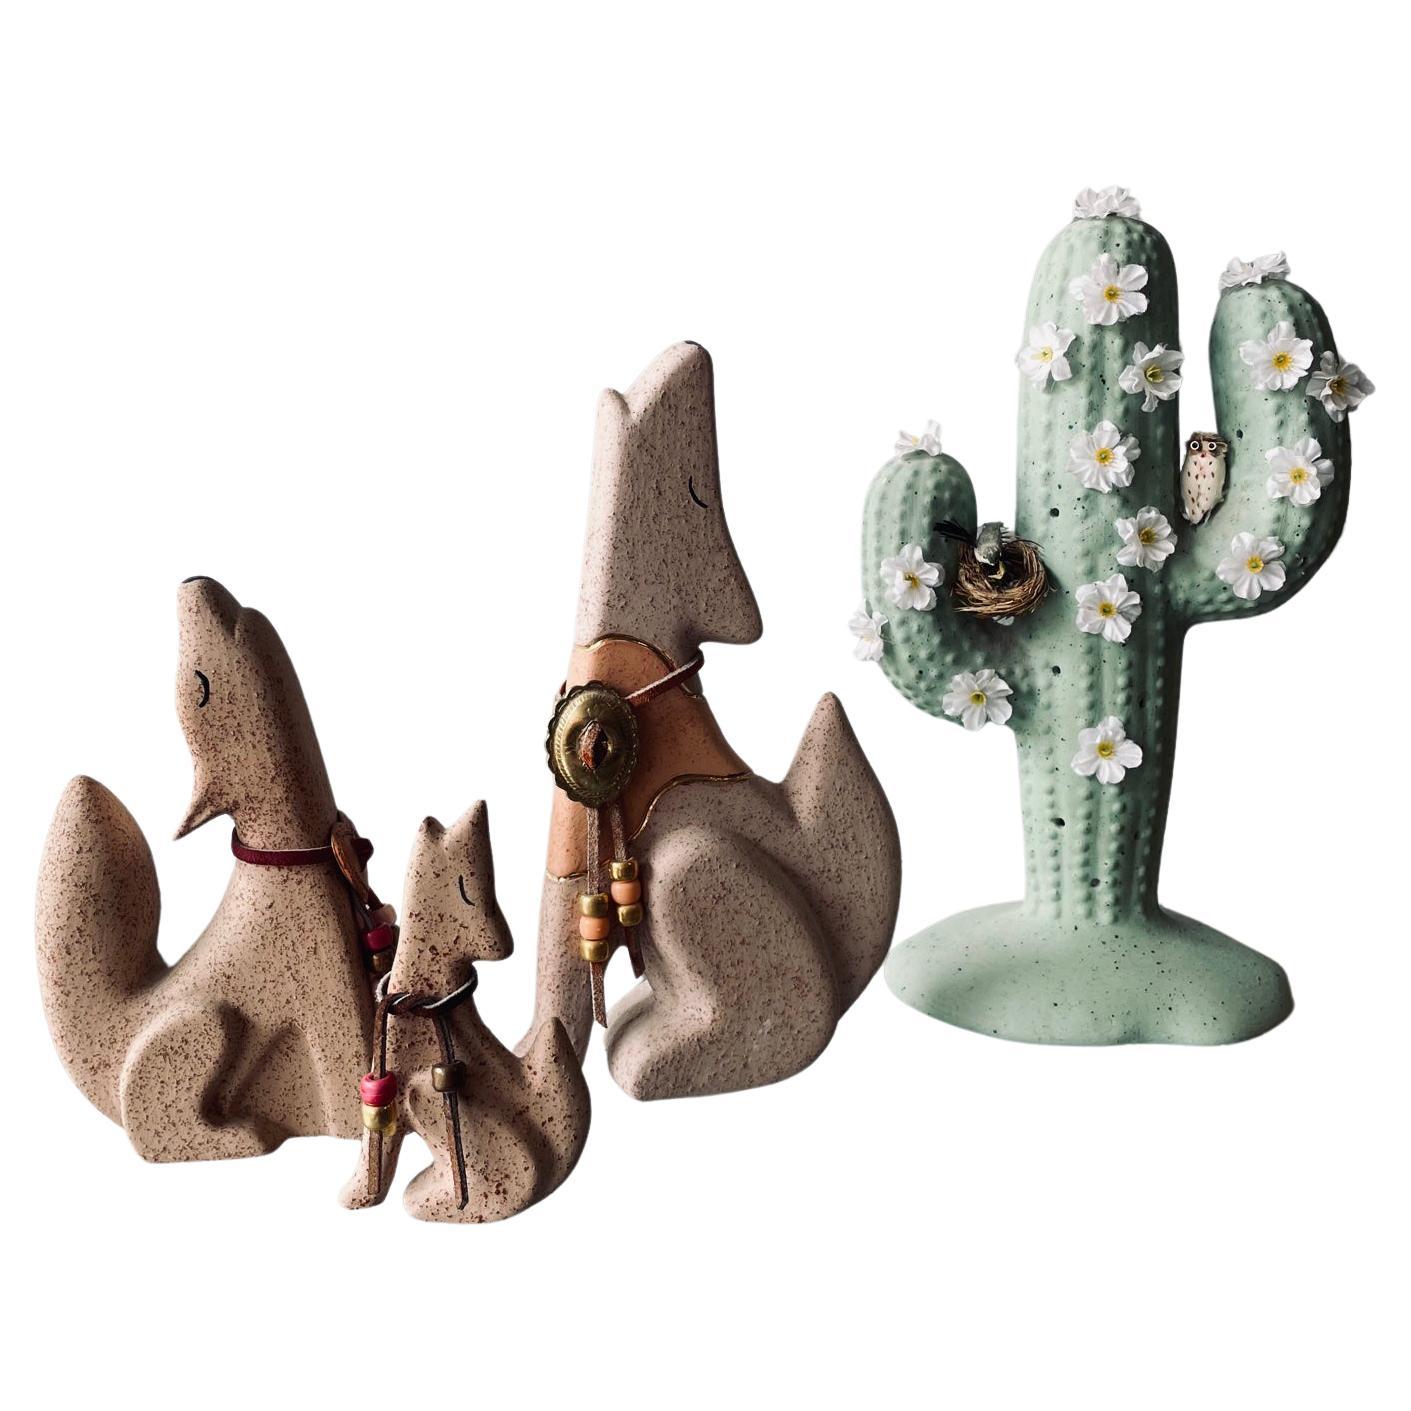 Vintage Ceramic Howling Dogs and Cactus Set